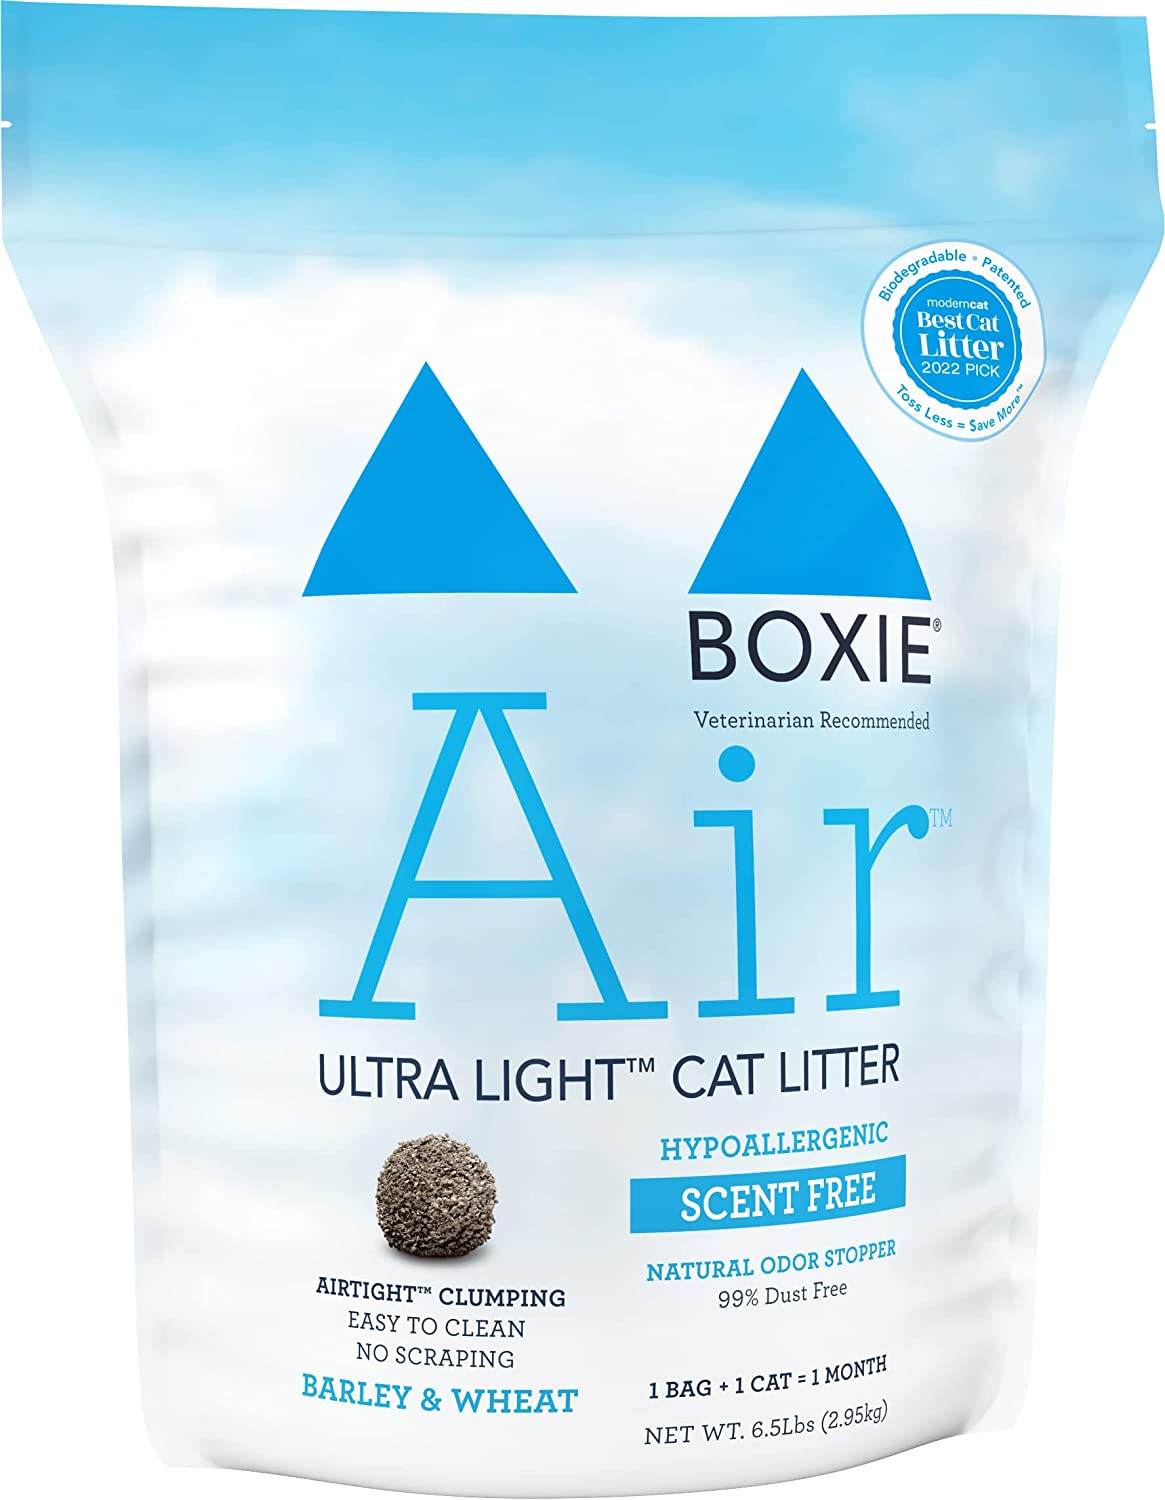 Boxiecat Air Lightweight Scent Free - BlackPaw - For Every Adventure